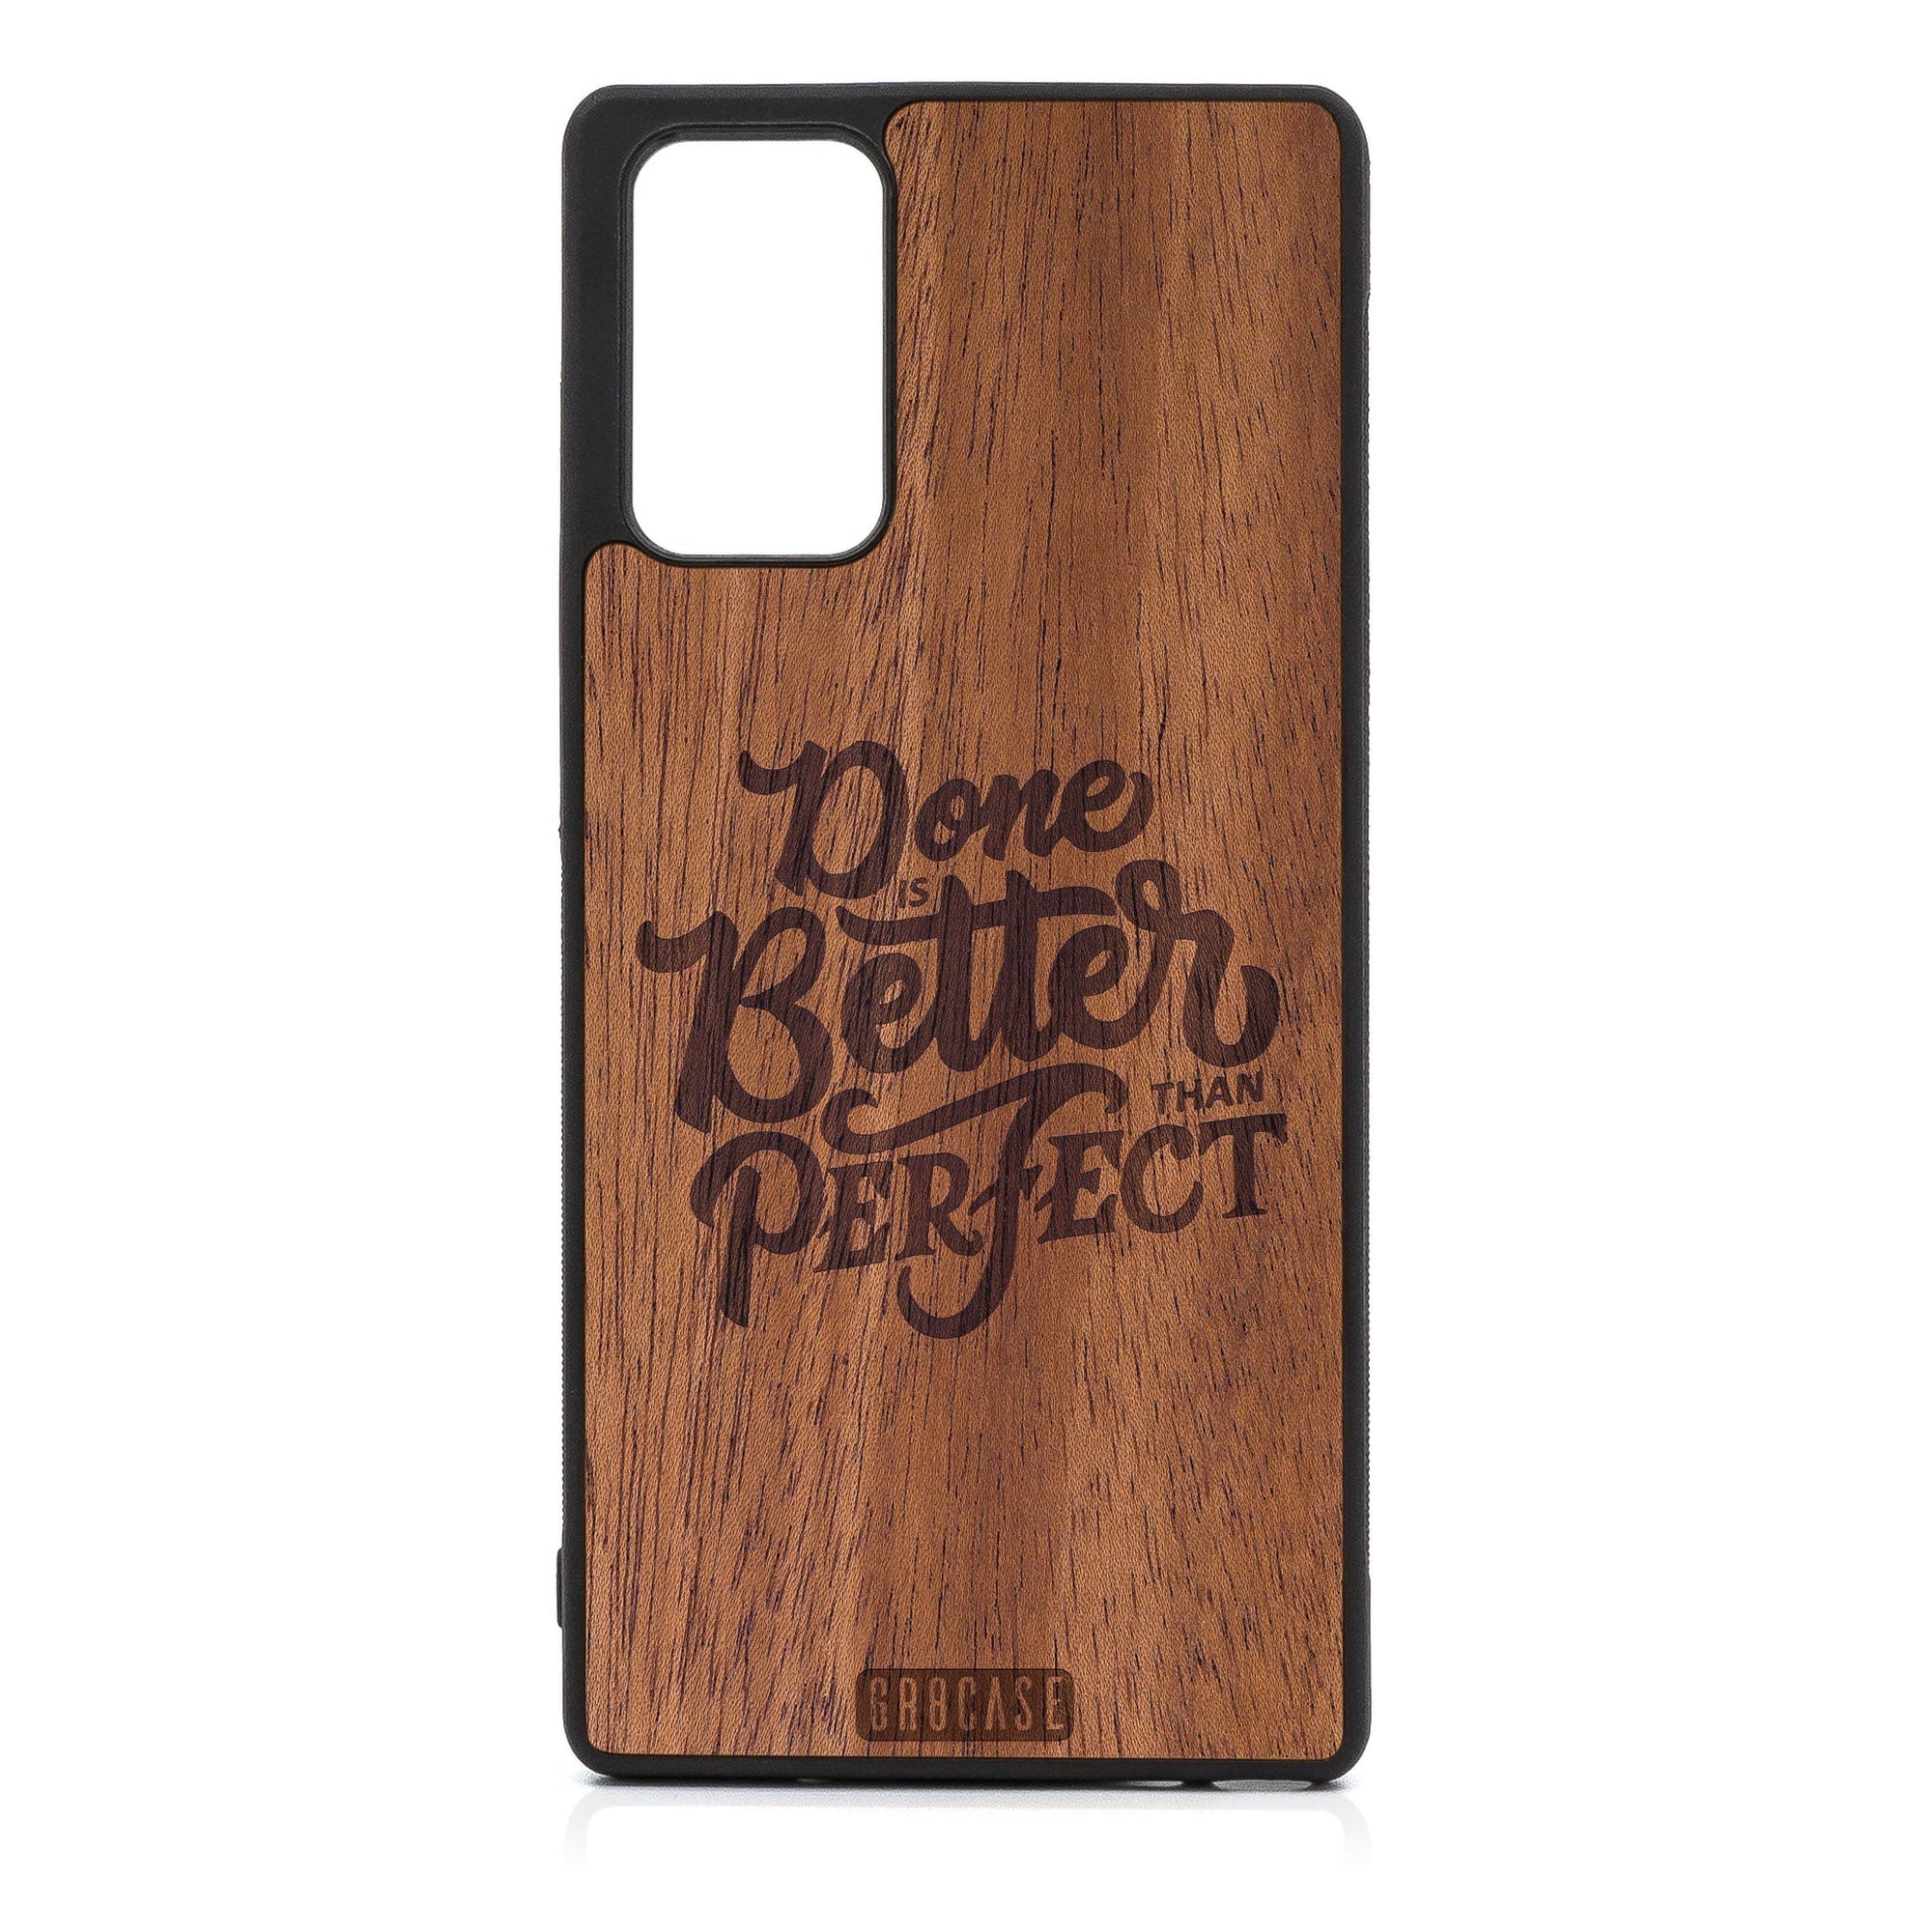 Done Is Better Than Perfect Design Wood Case For Samsung Galaxy A72 5G